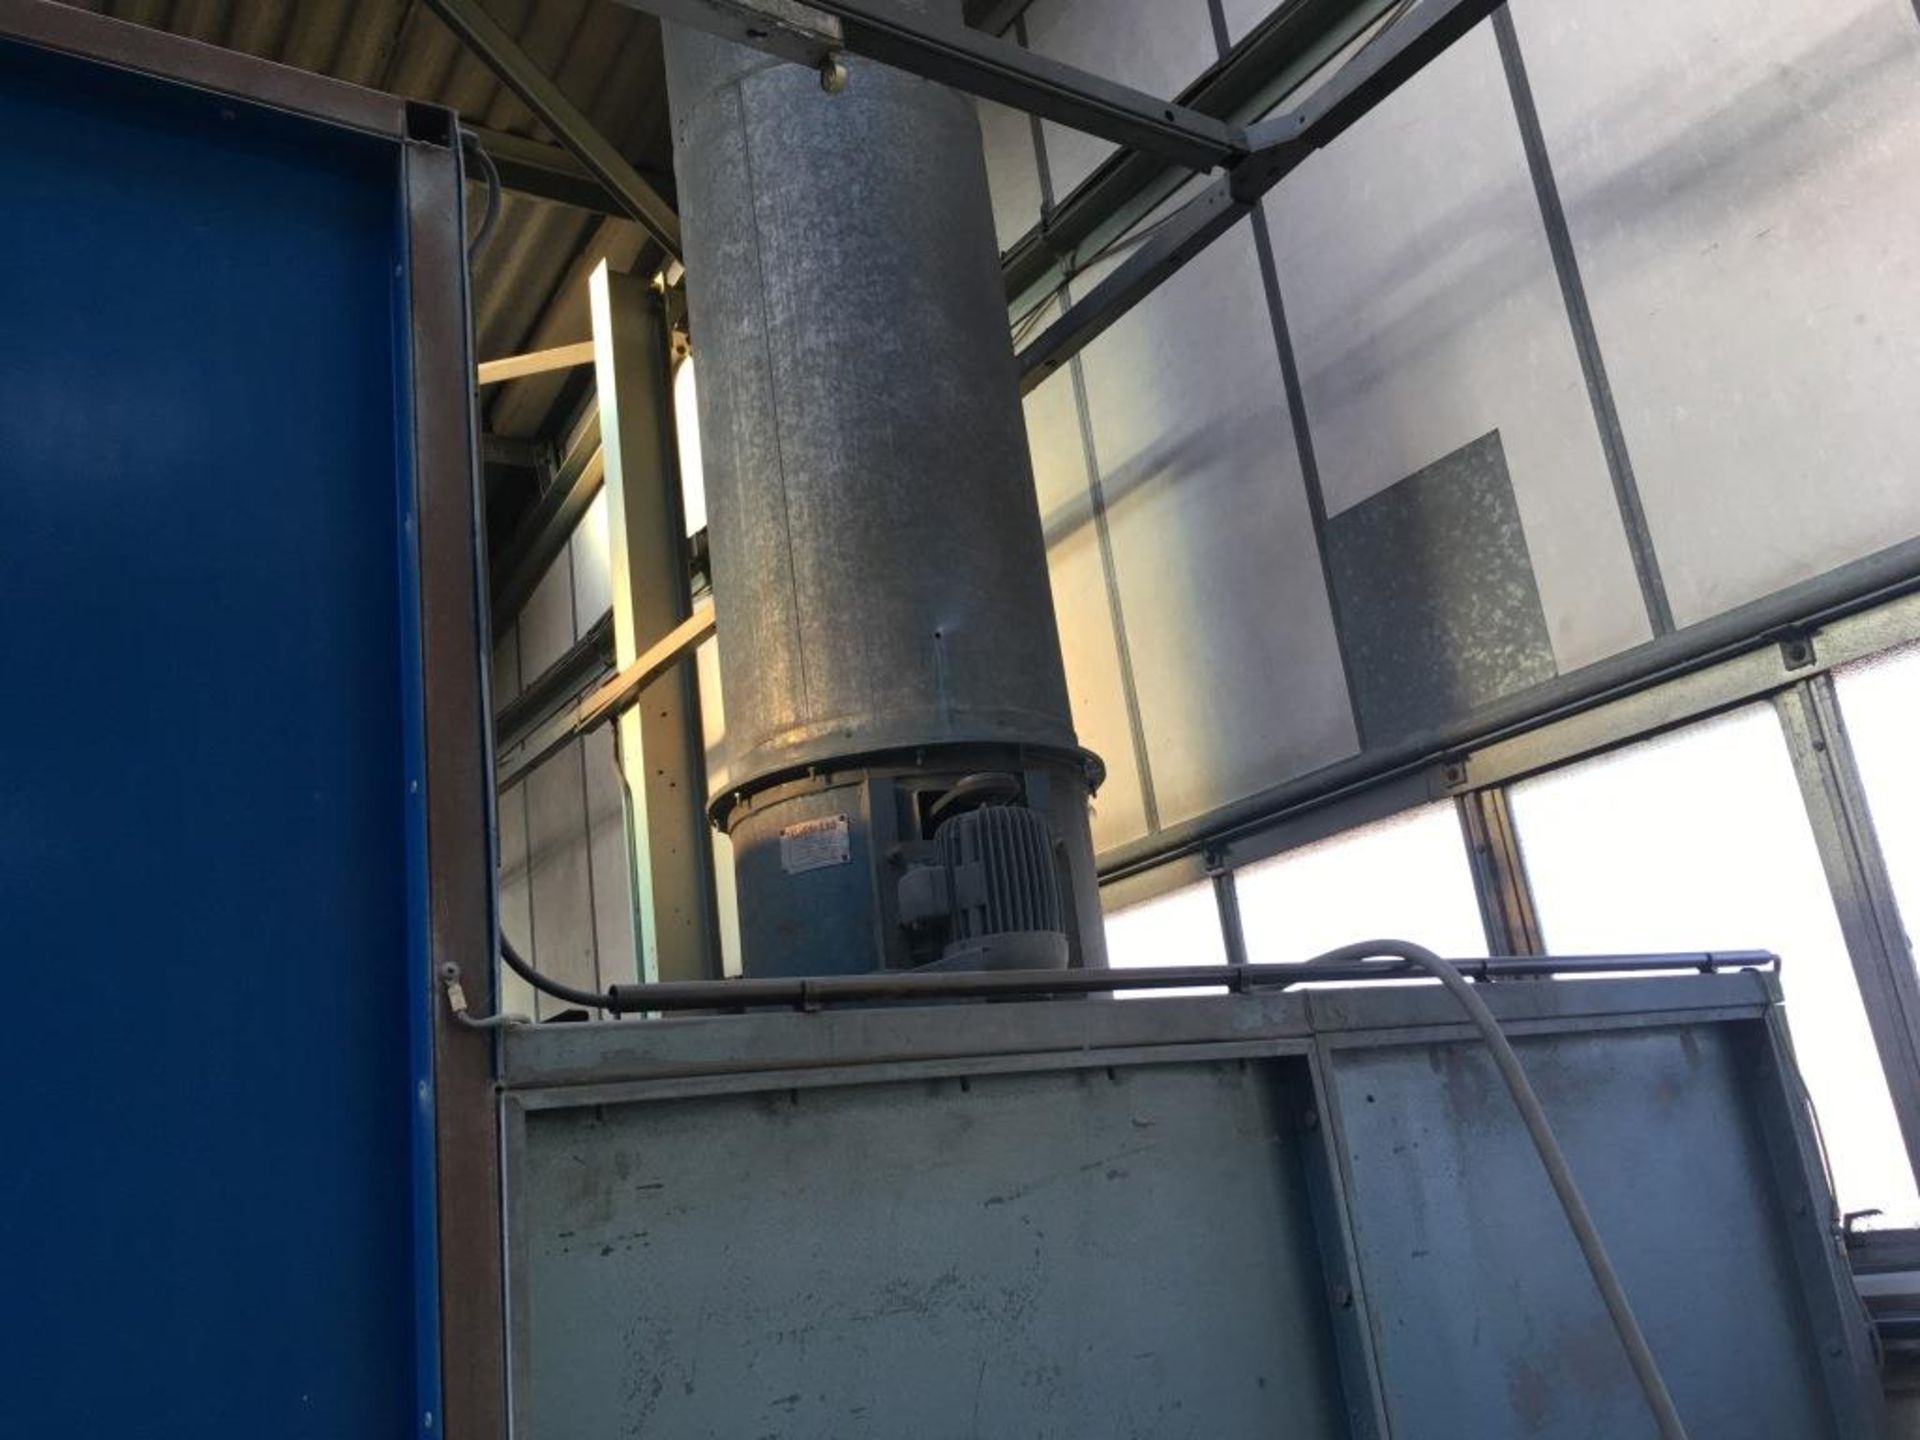 Fabricated spray booth, approx. external dimensions 3.2m wide x 4.8m deep x 3.1m tall. Chimney not - Image 3 of 3